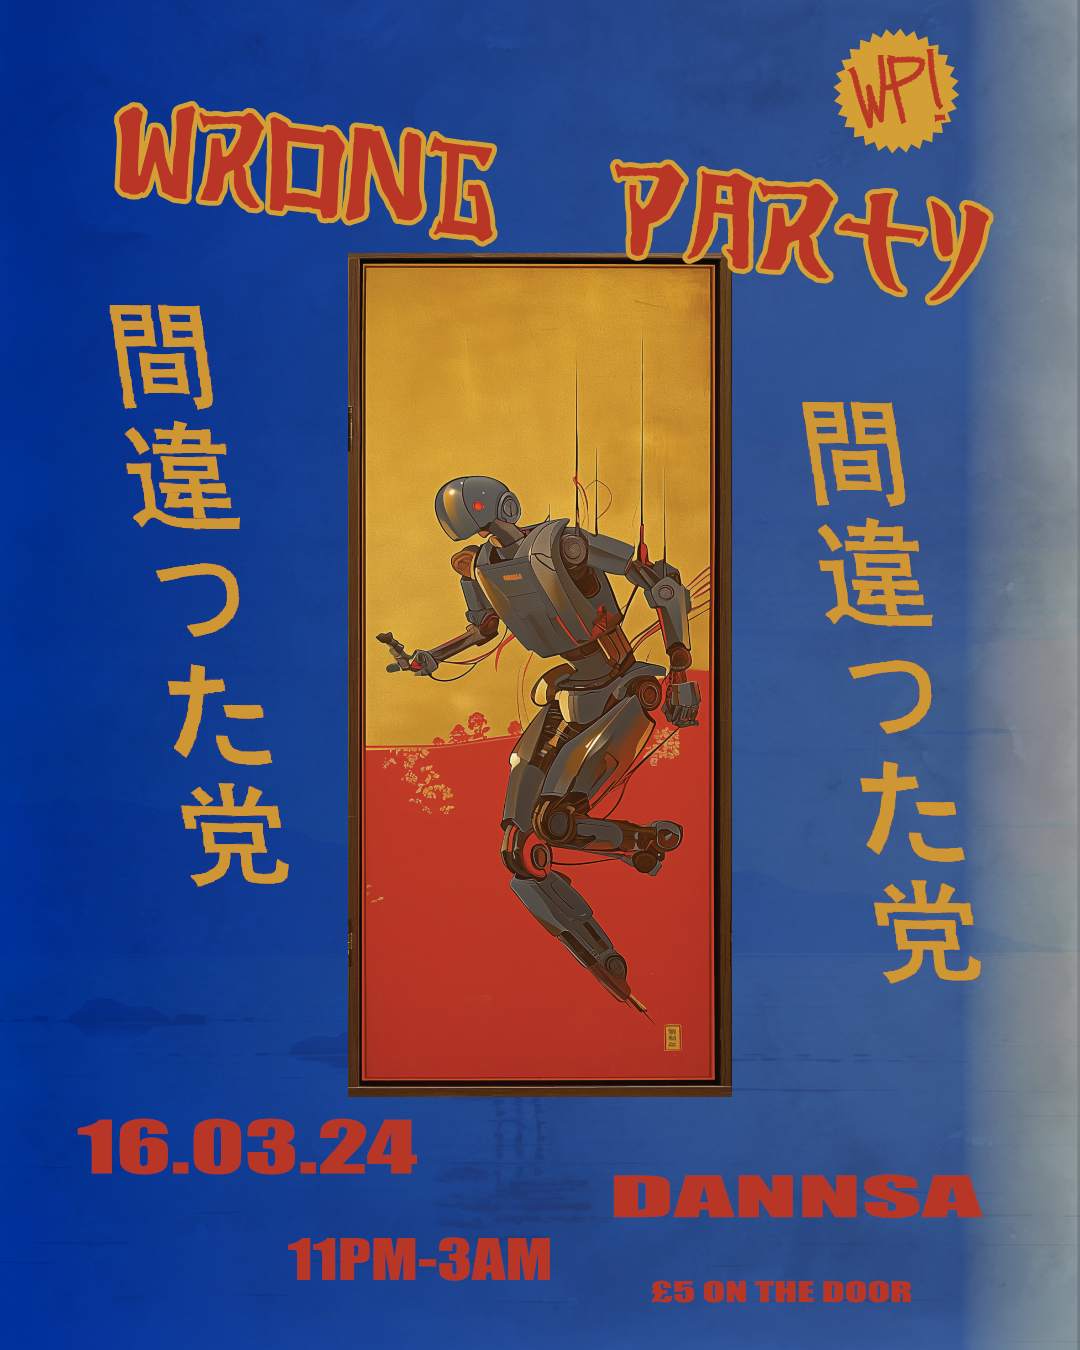 Wrong Party - フライヤー表